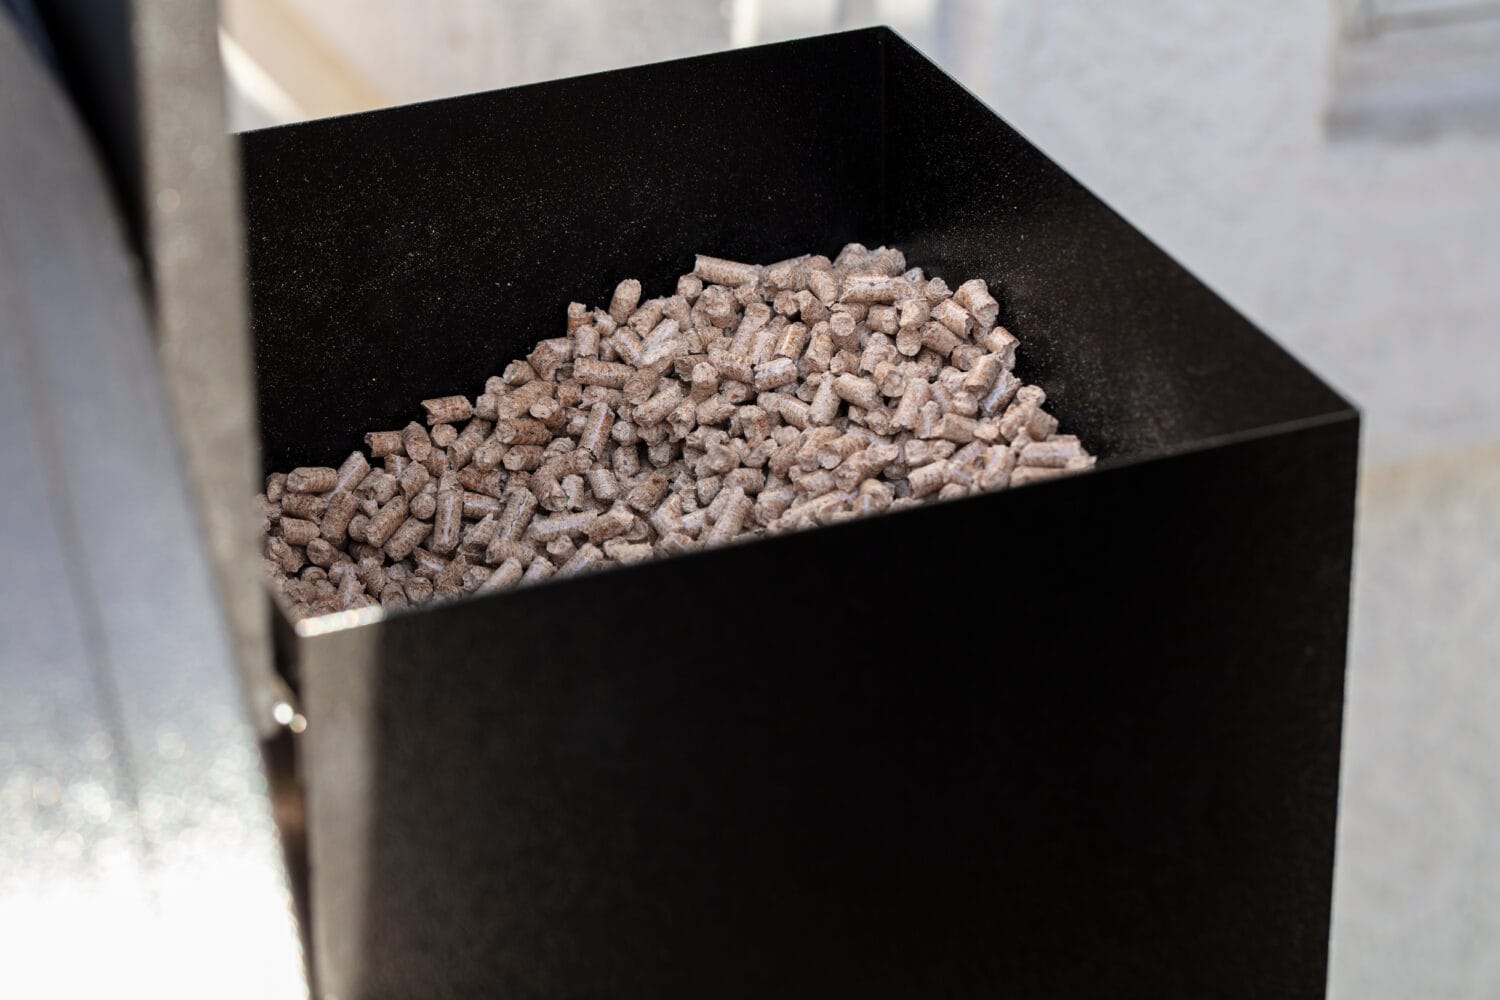 Wood pellets in a smoker pellet box for barbecue